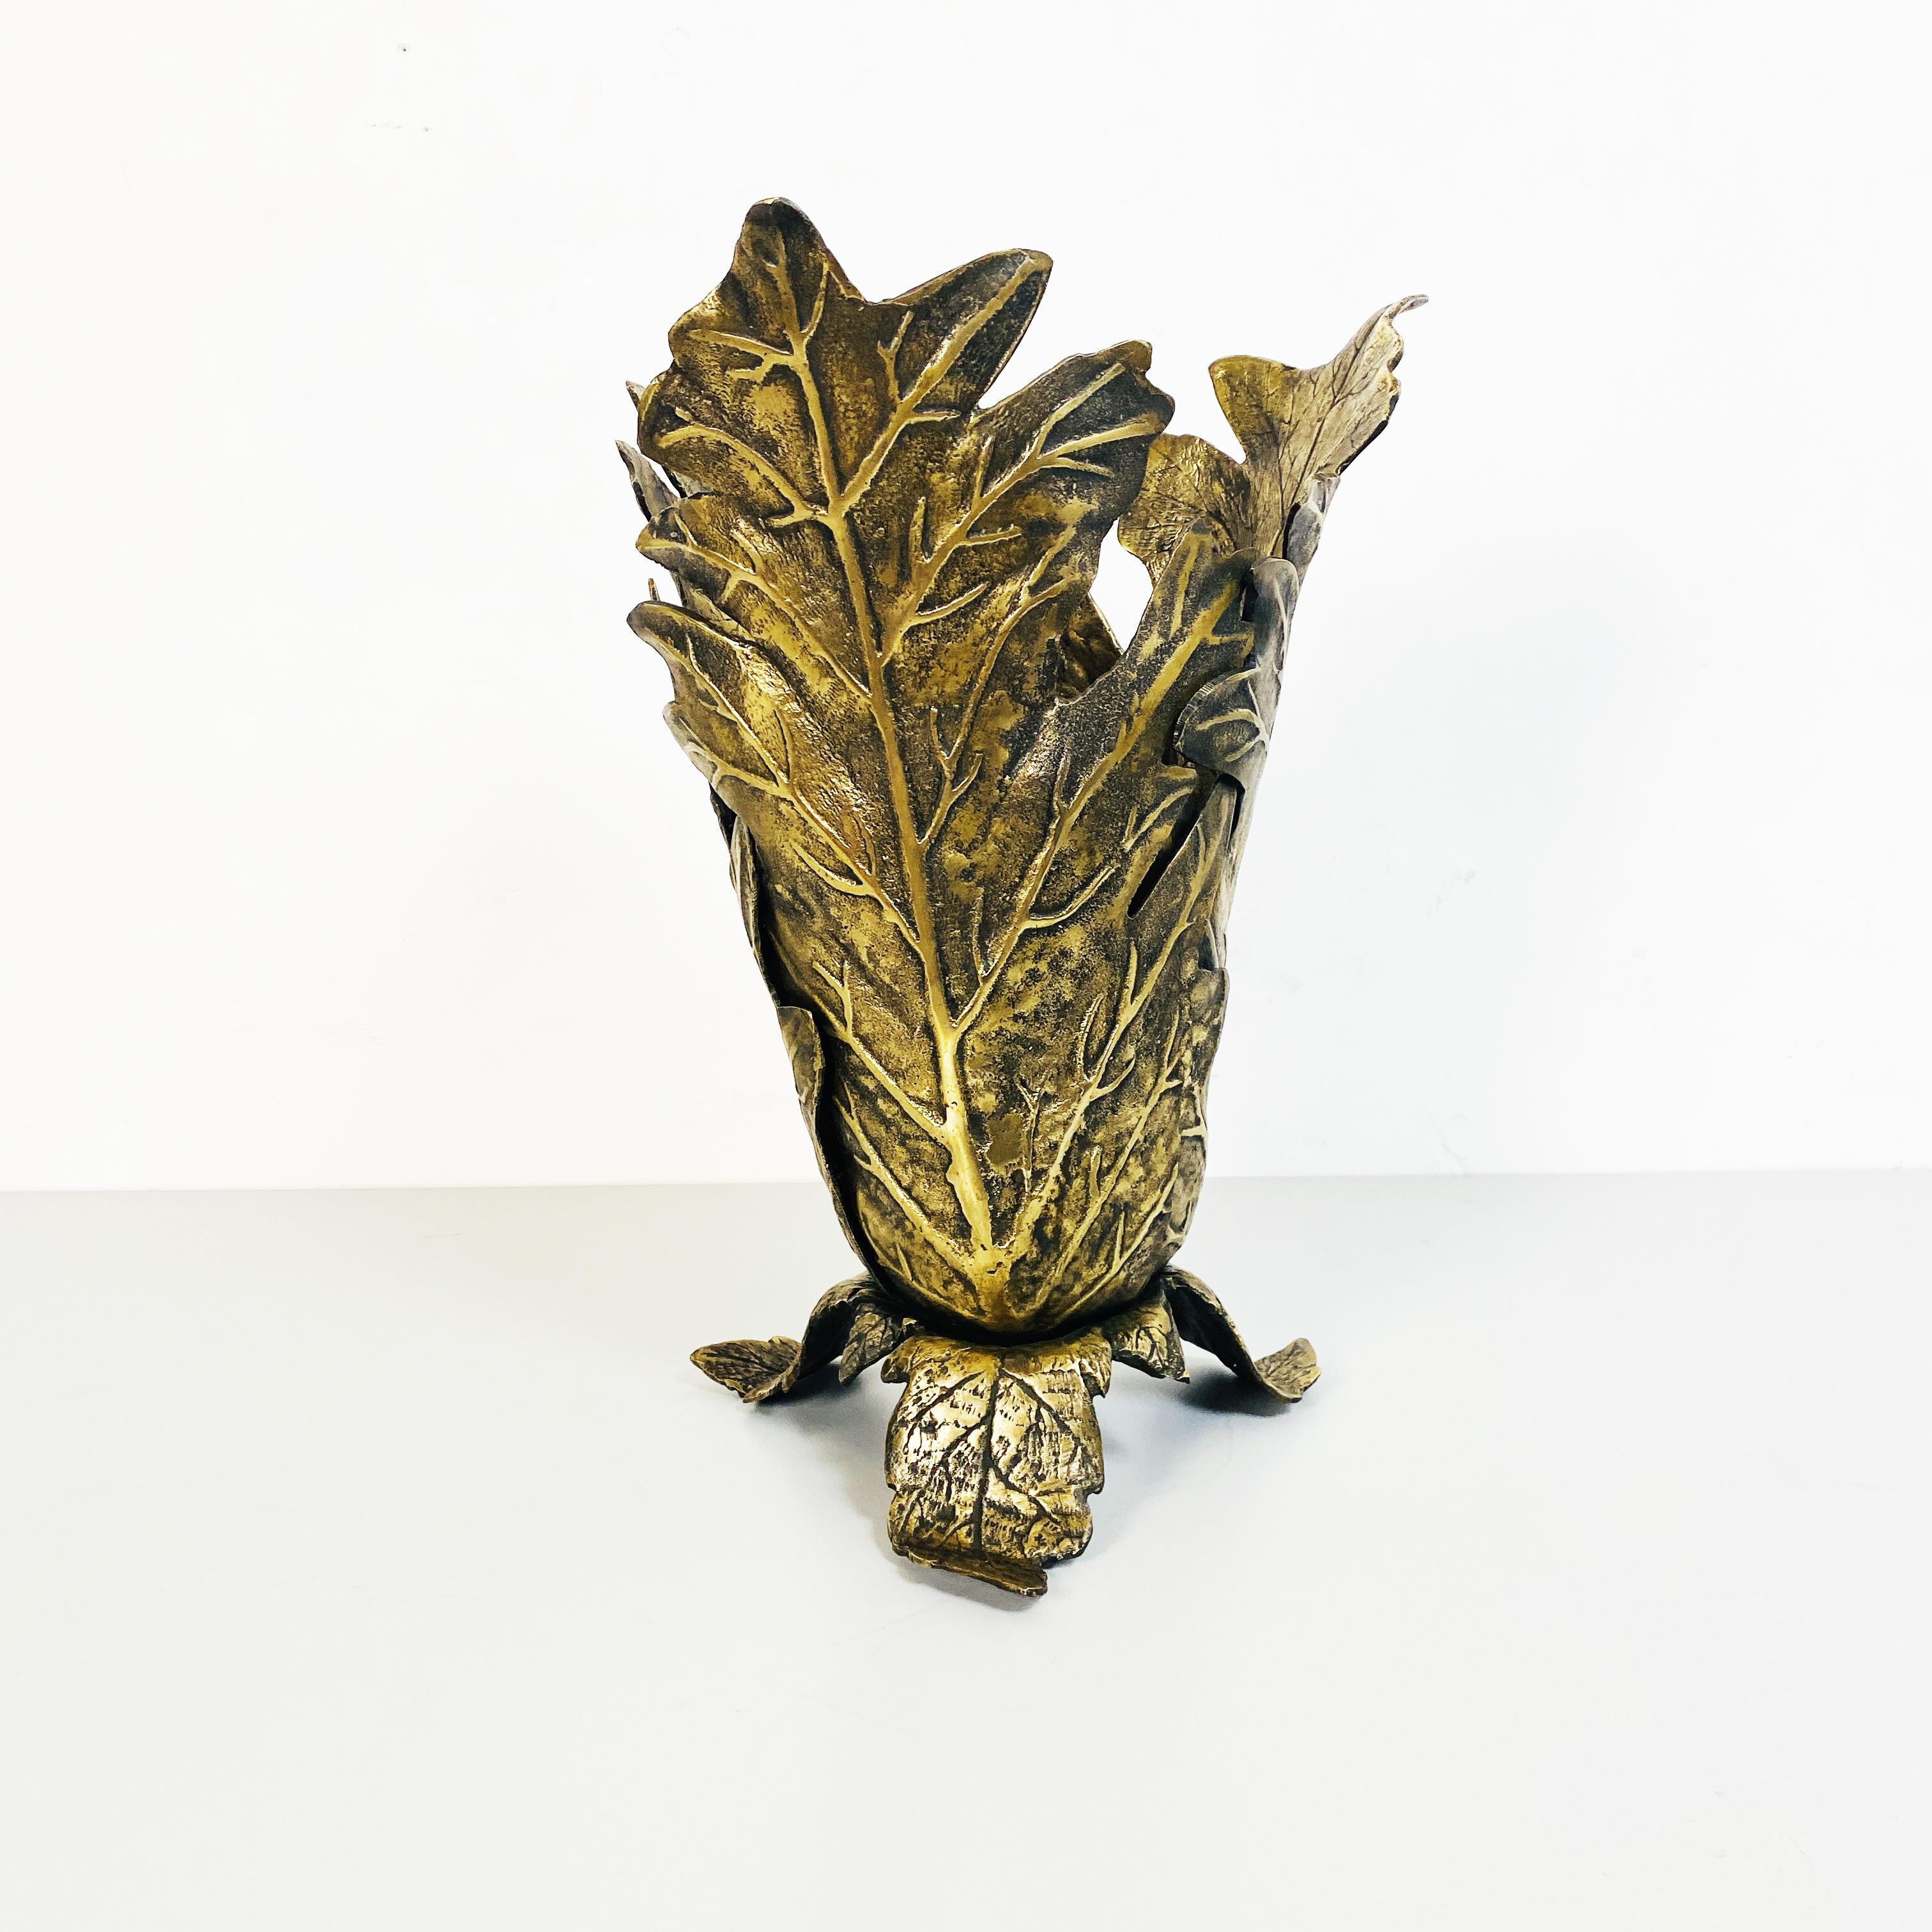 Italian mid-century Burnished brass umbrella stand, 1960s
Umbrella stand in the shape of leaves in burnished brass, there is an internal container.
1960s
Good conditions.
Measures in cm 34x34x46h.
 